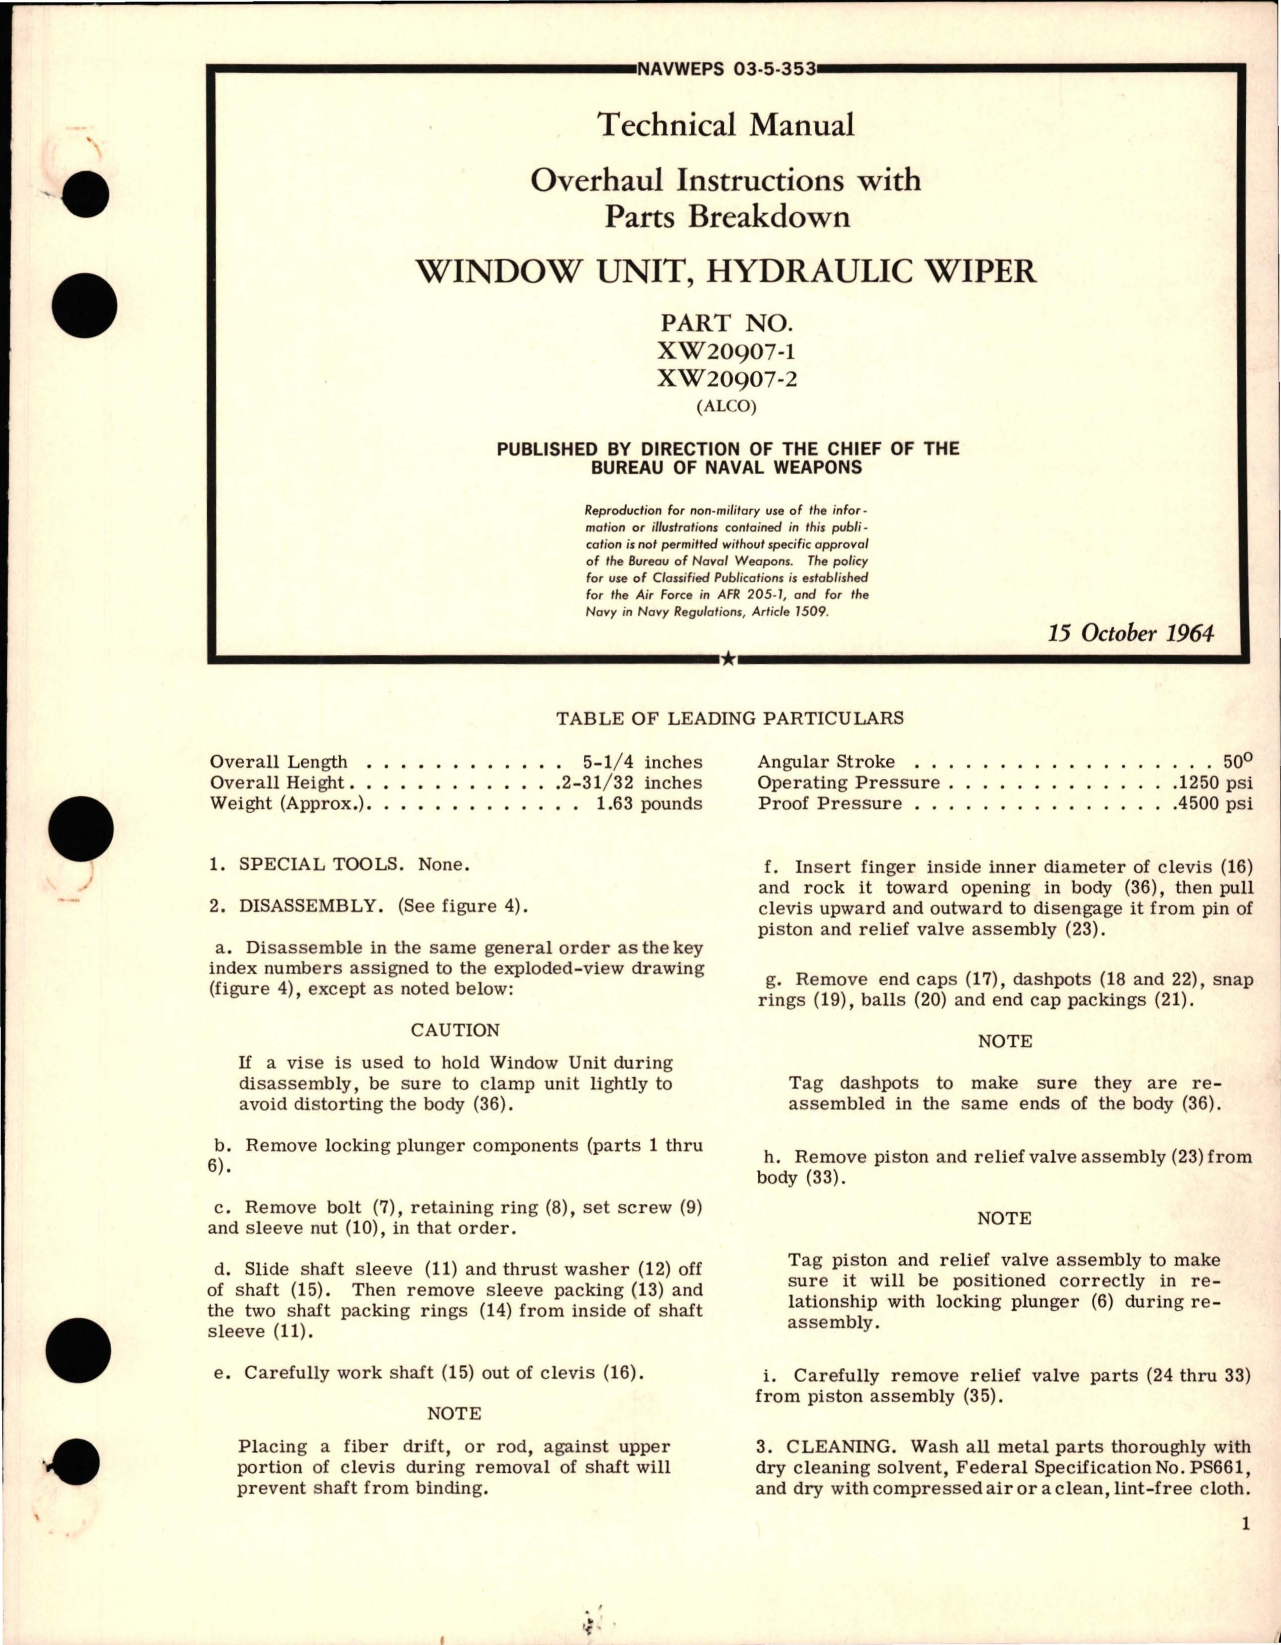 Sample page 1 from AirCorps Library document: Overhaul Instructions with Parts Breakdown for Hydraulic Wiper Window Unit - Parts XW20907-1 and XW20907-2 